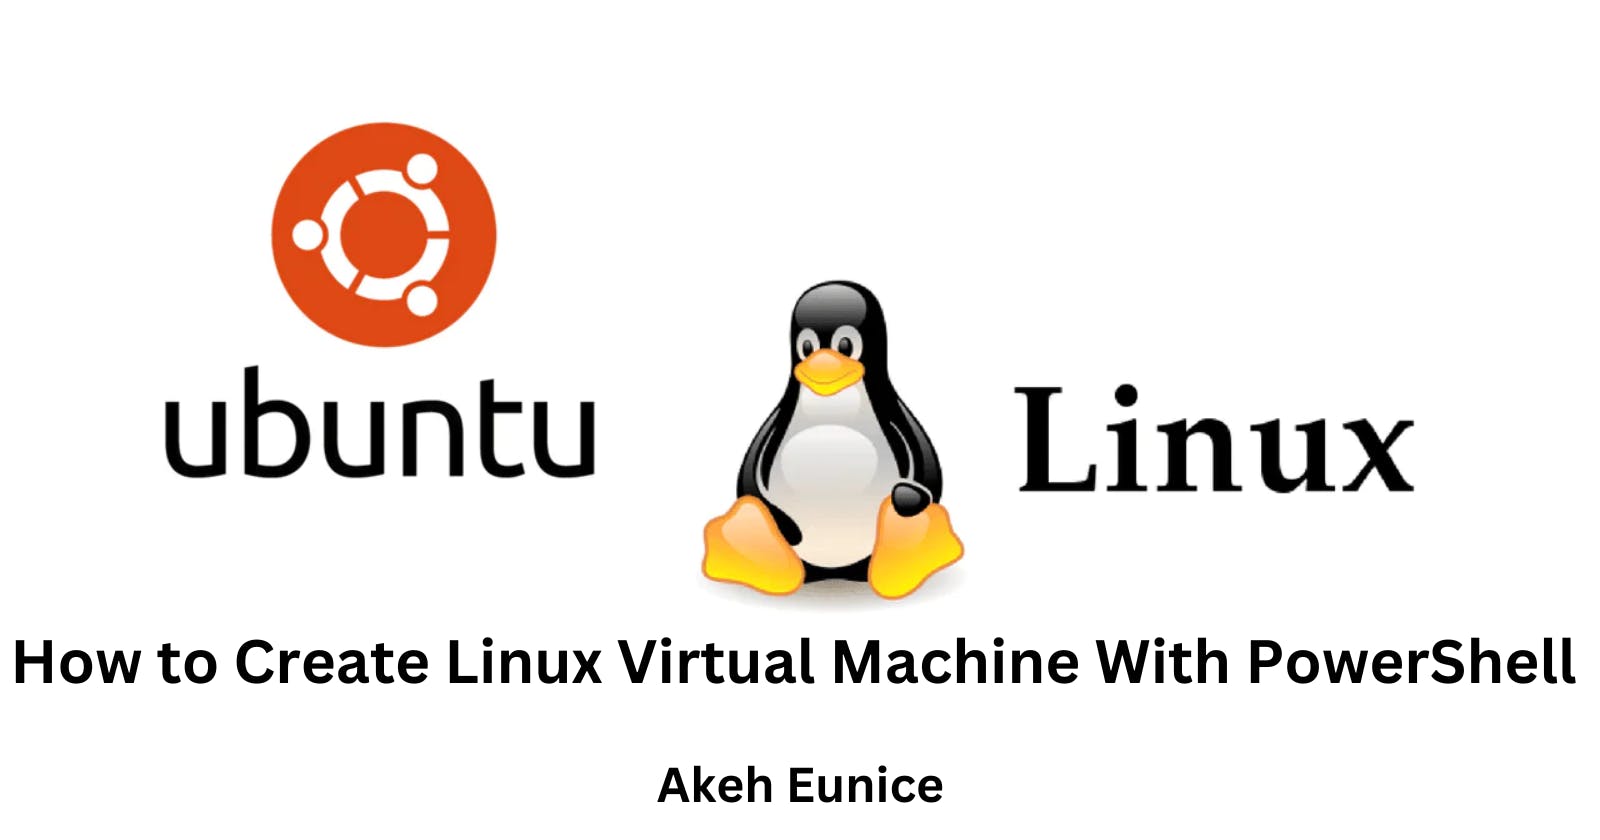 Starter's Guide to Creating a Linux Virtual Machine on Azure